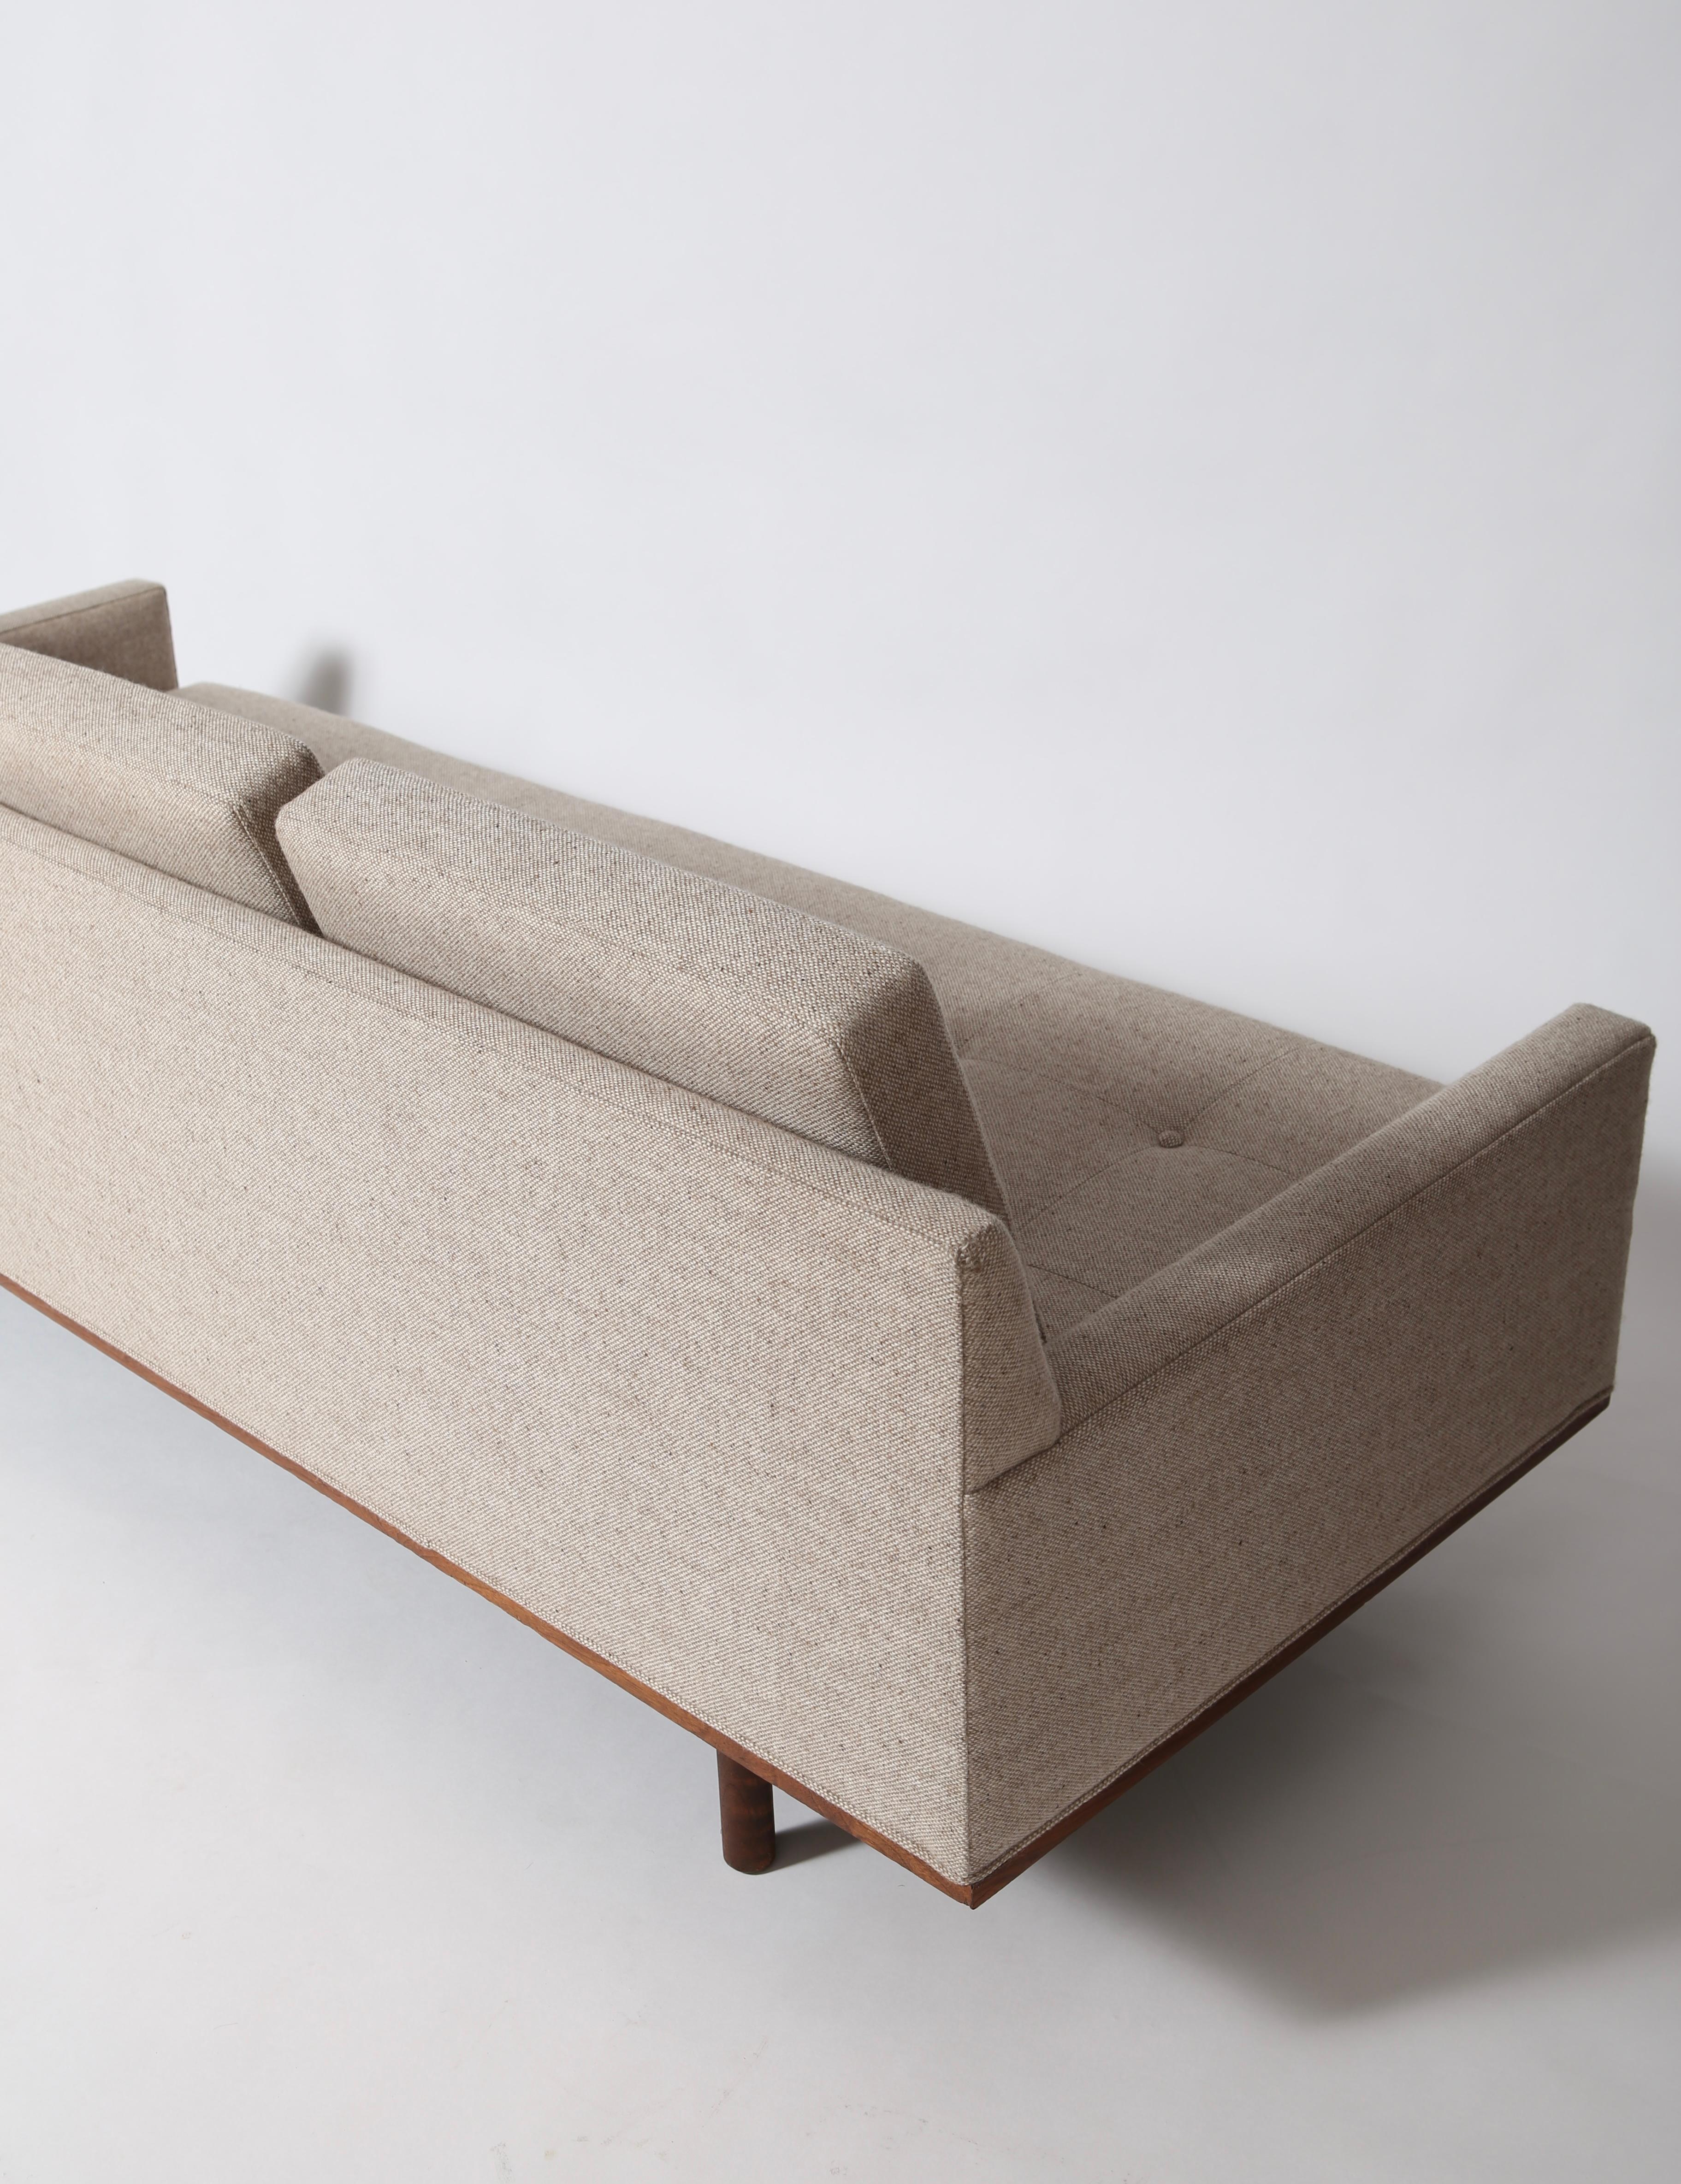 Other Low Profile Mid-Century Modern Sofa by Jules Heumann